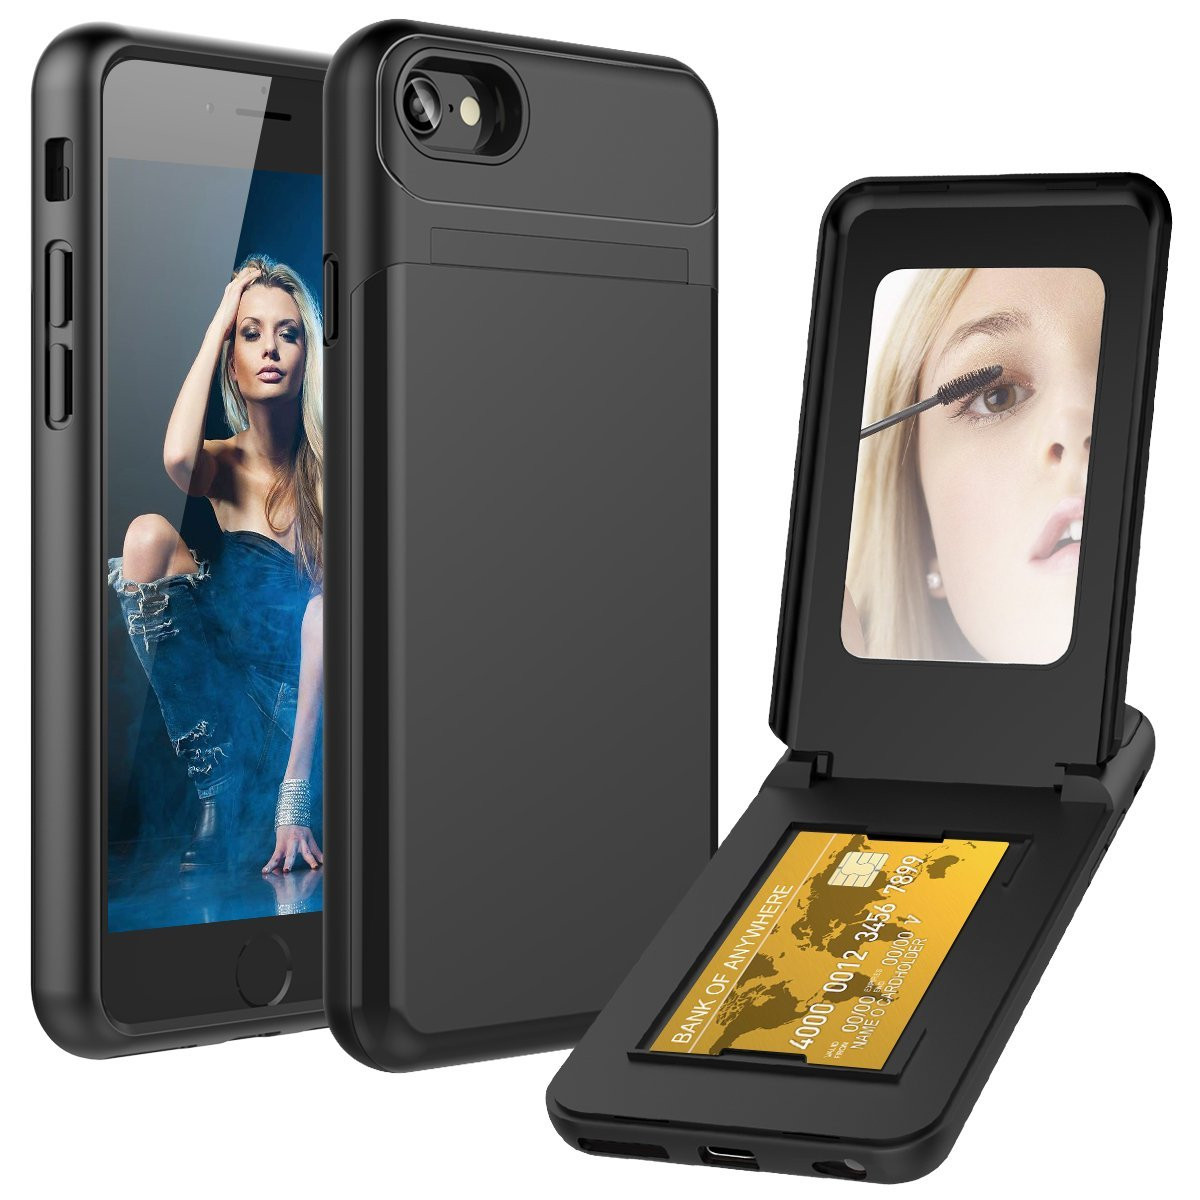 Apple iPhone 8 -  Hard Phone Case with Hidden Mirror and Card Holder Compartment, Black